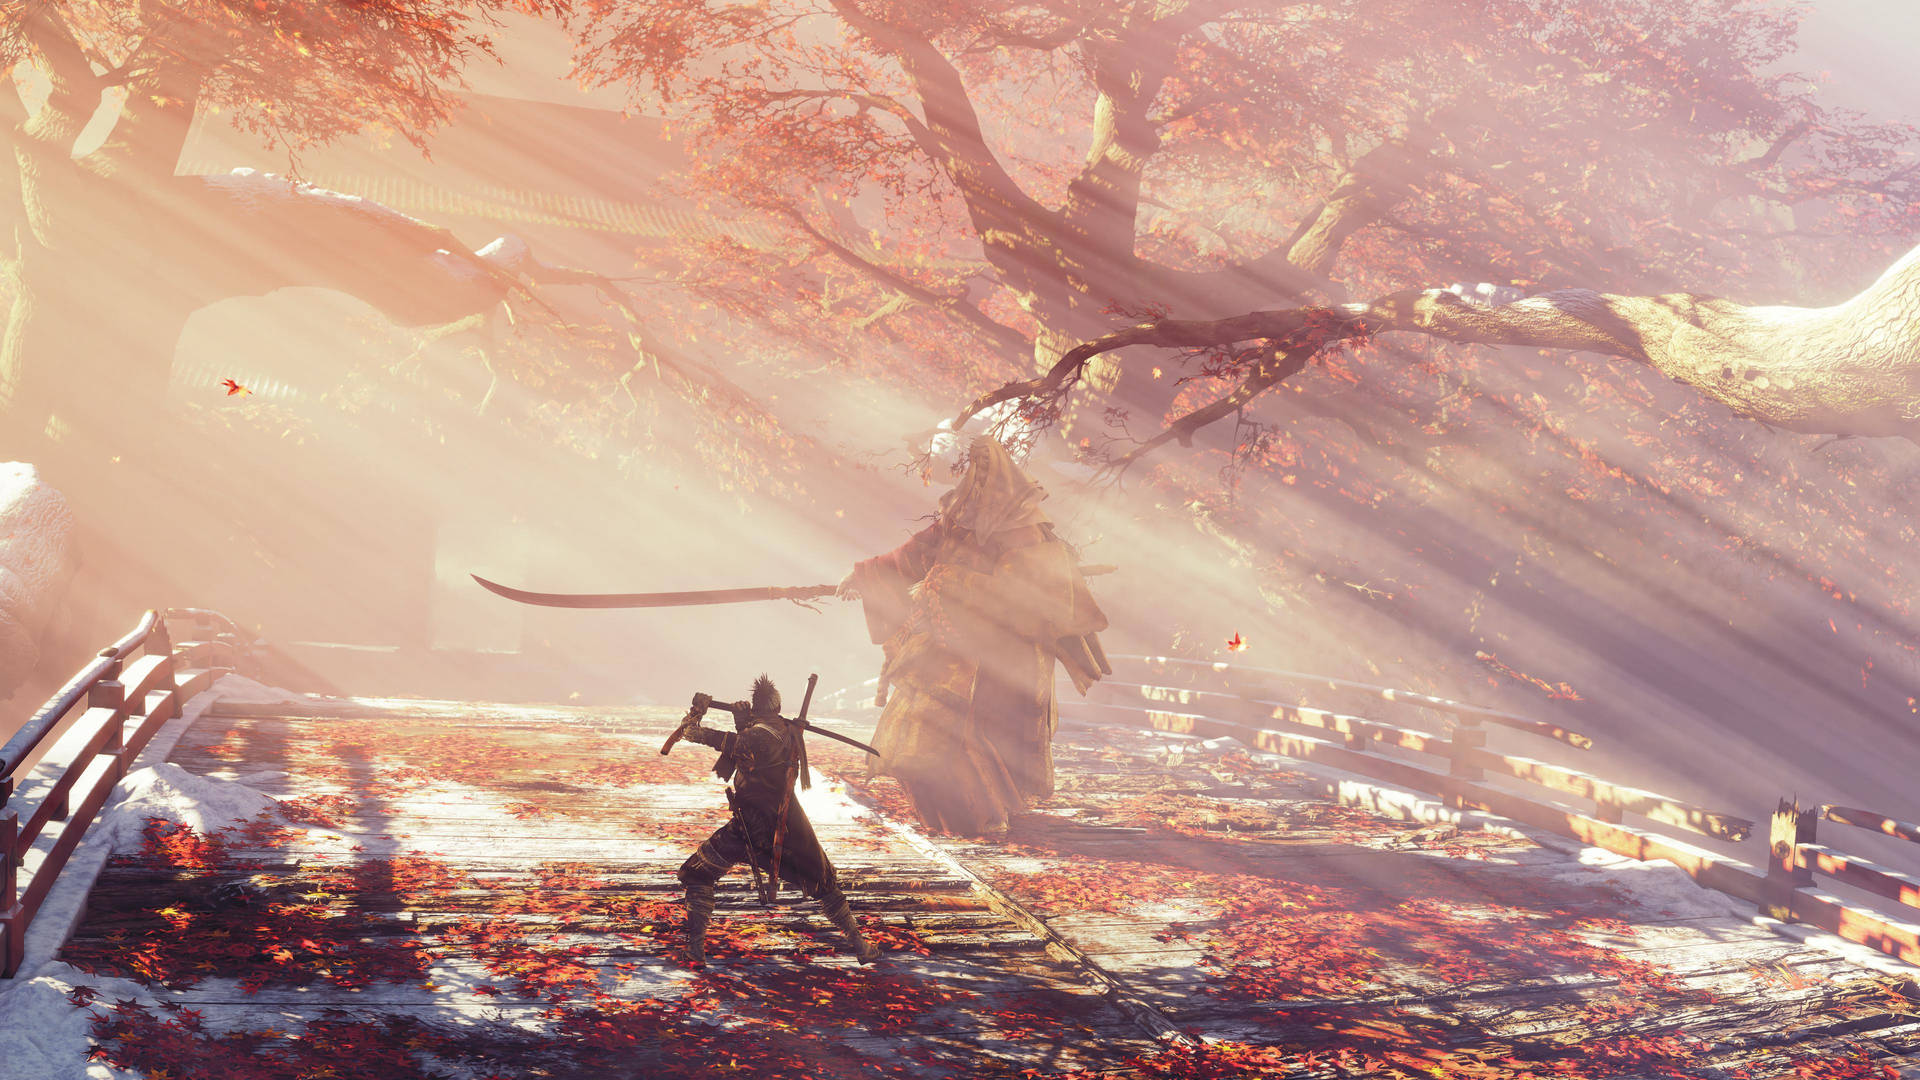 Dive into a world of swords and stealth with Sekiro Shadows Die Twice Wallpaper